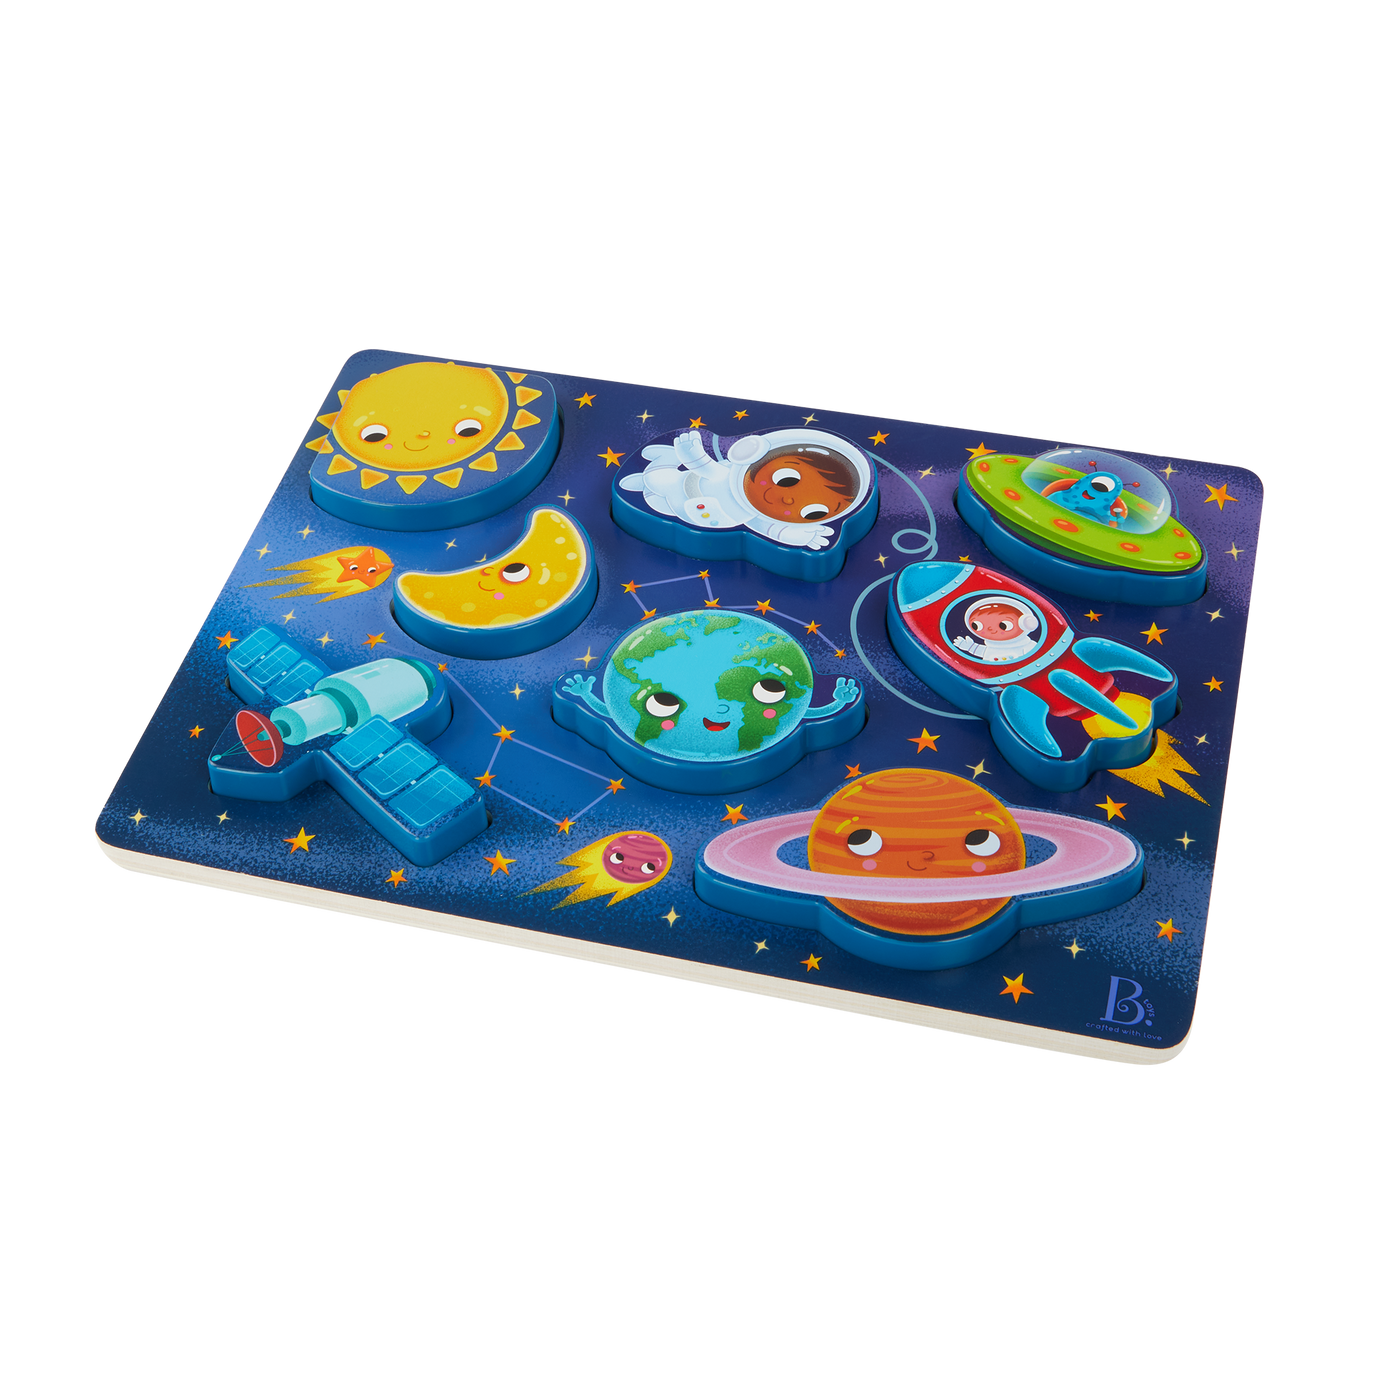 Outer space chunky puzzle.